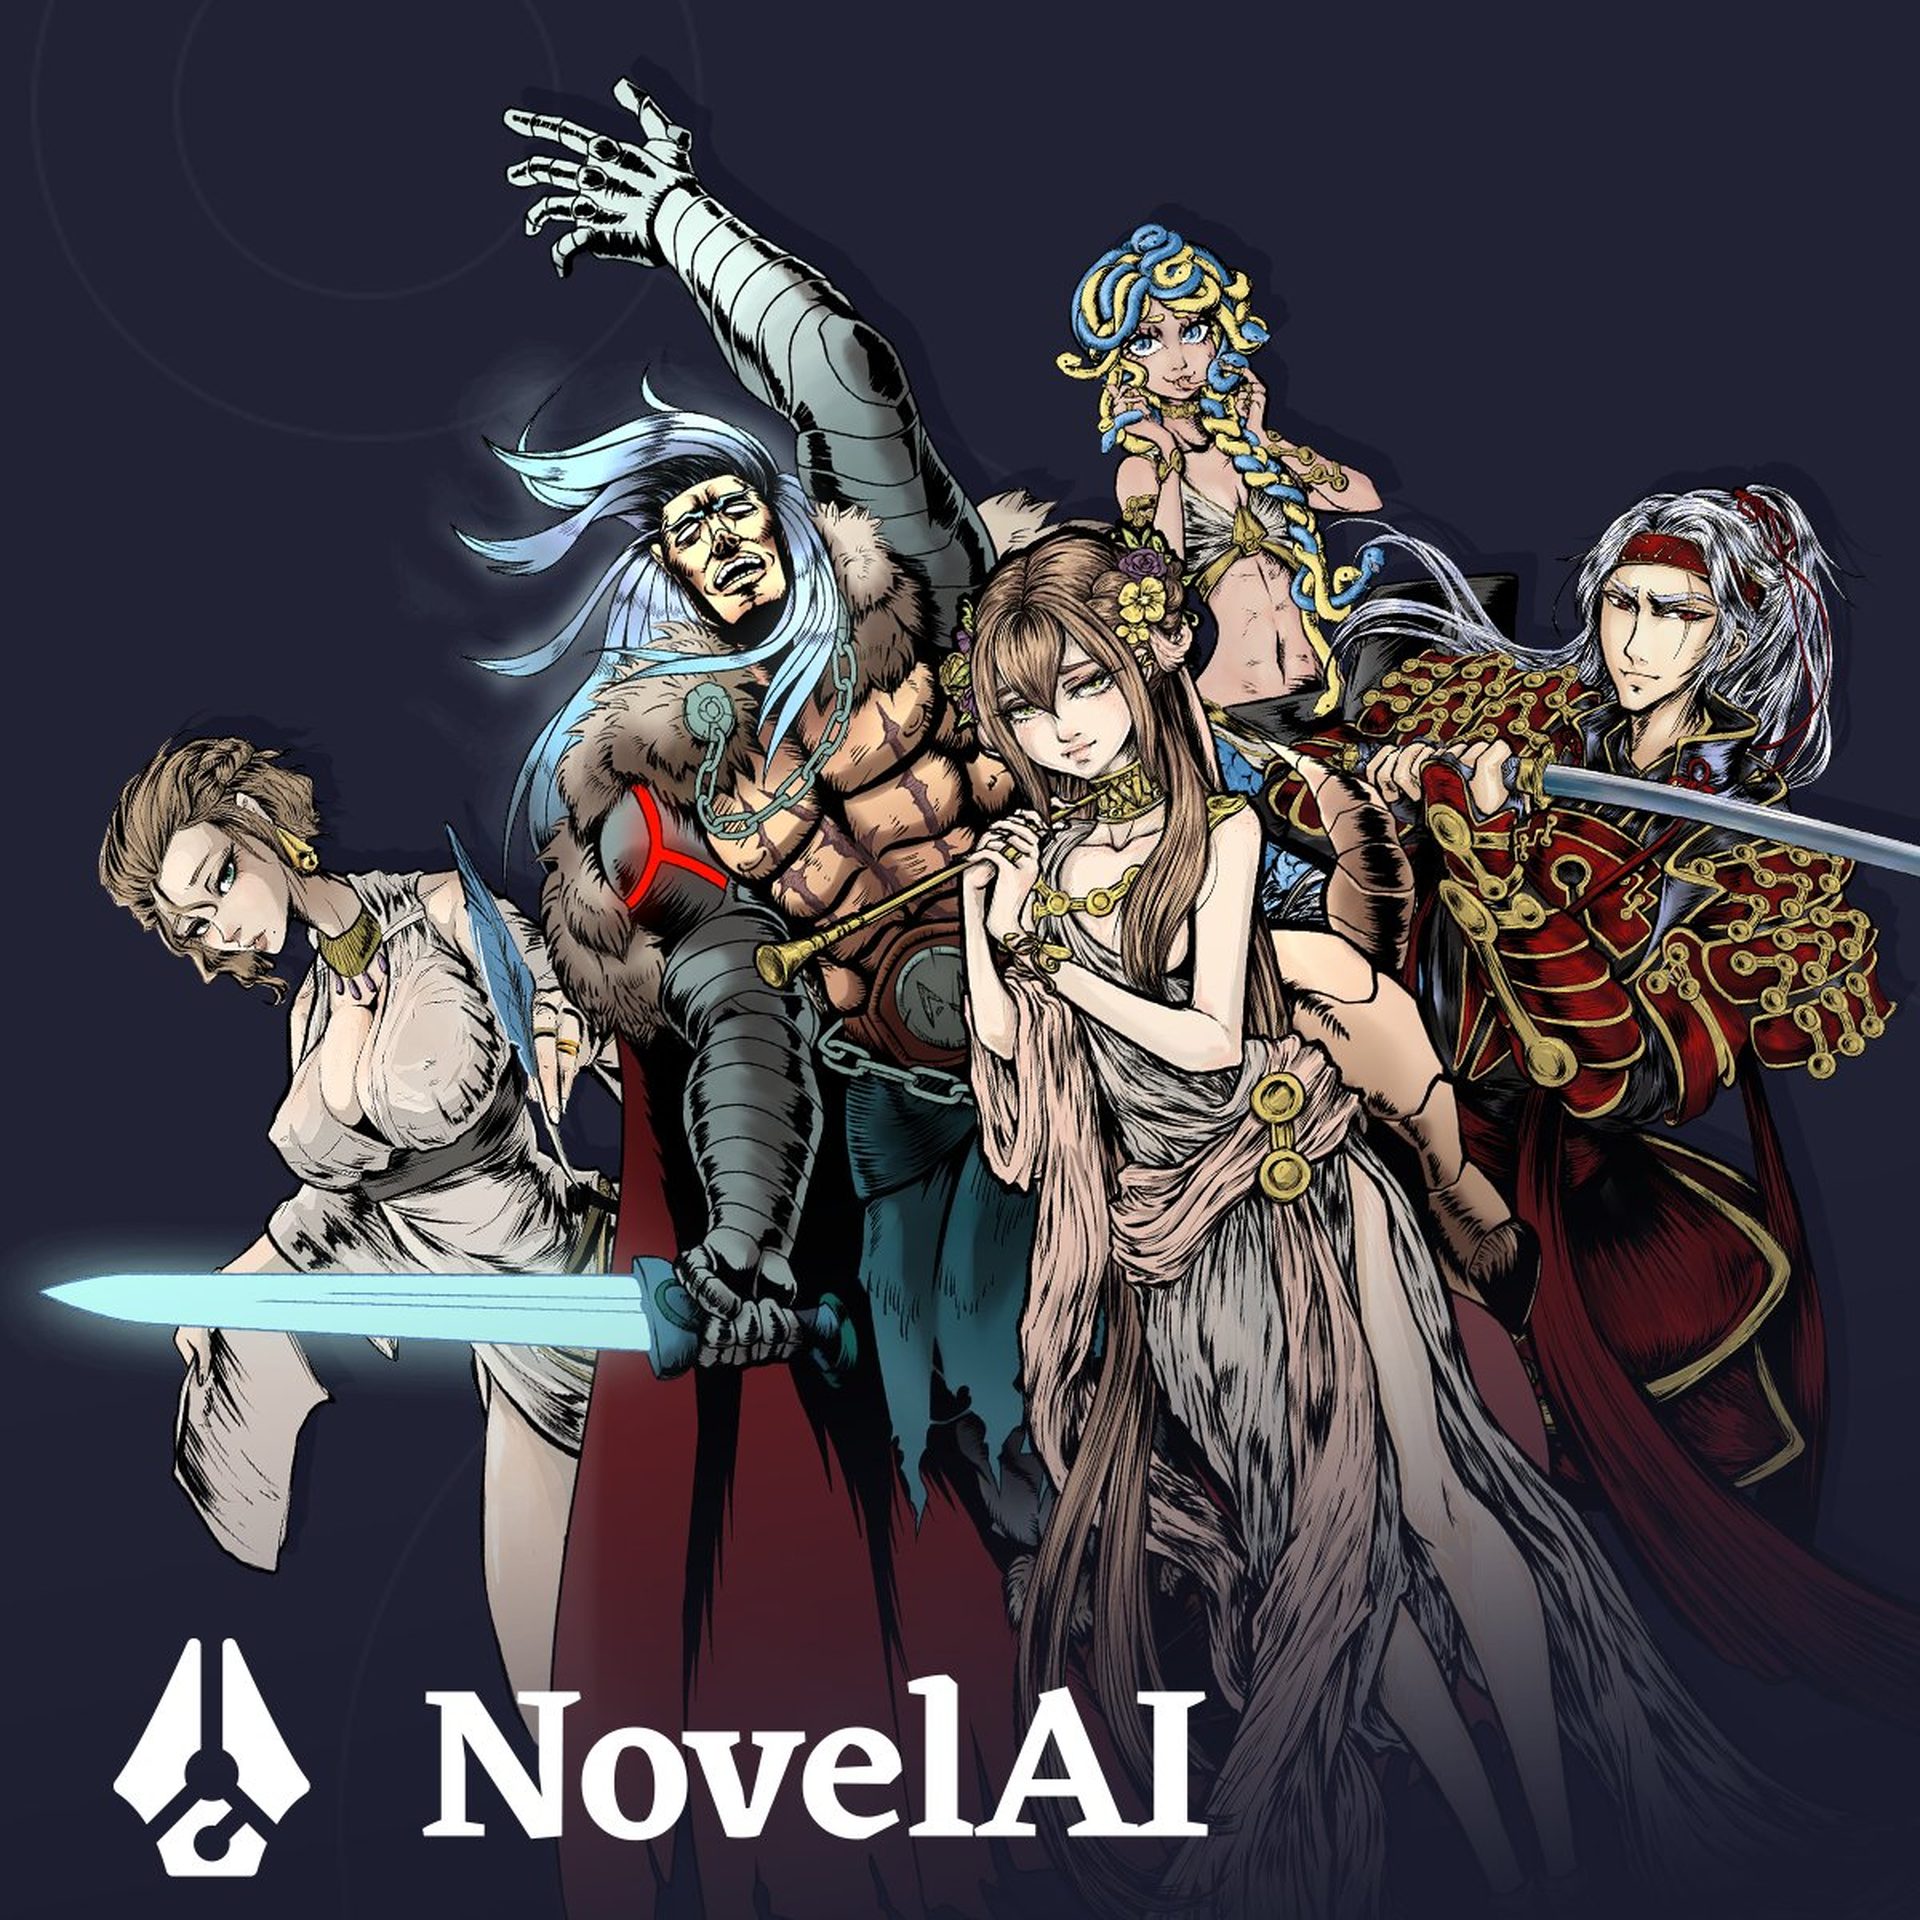 Image Generation has arrived, NovelAI Diffusion is here!